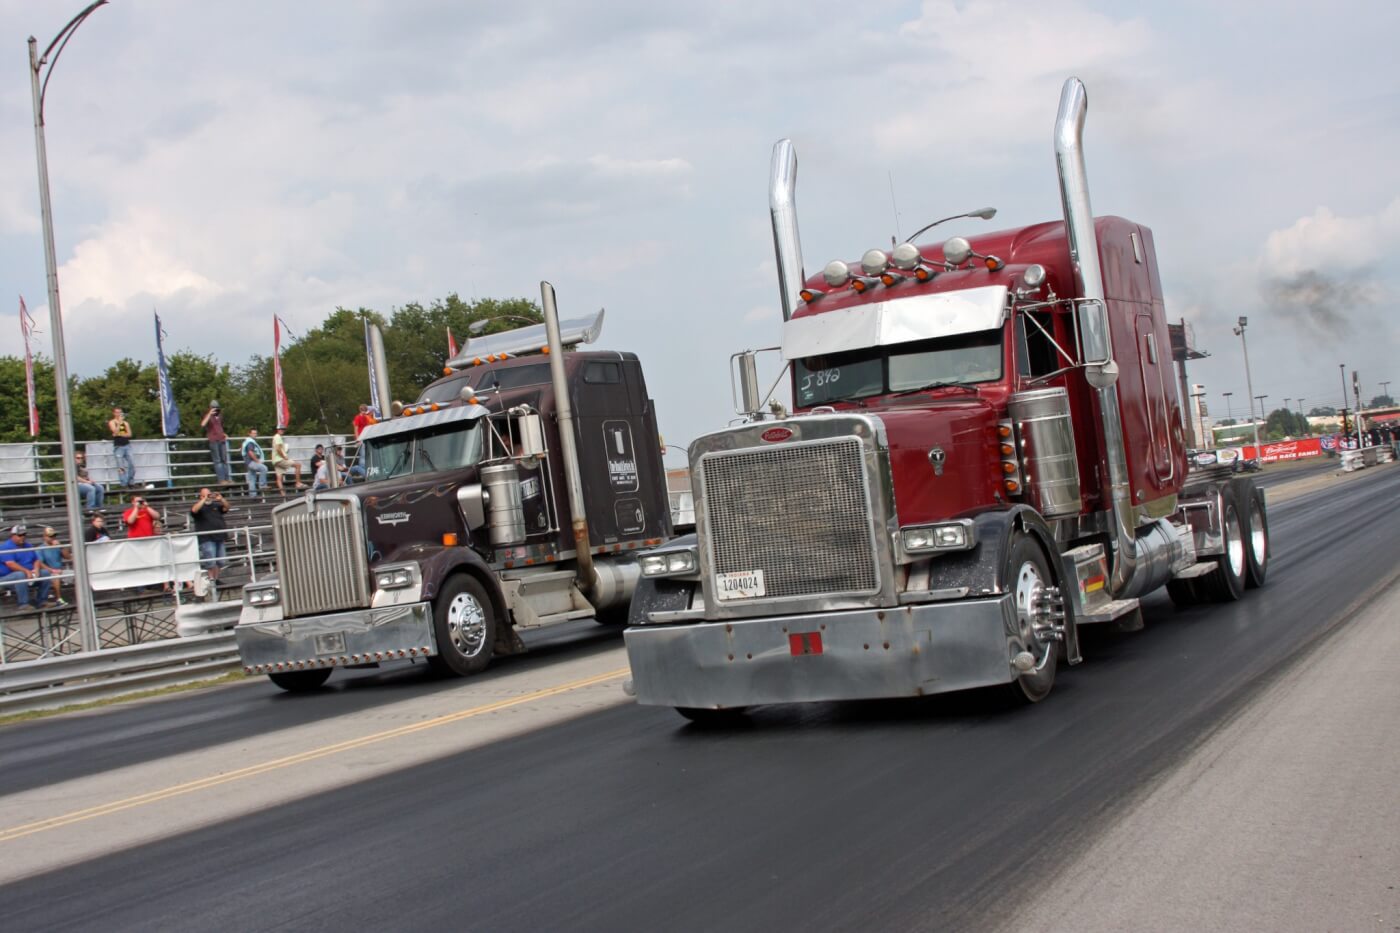 Rob Patterson (near lane) drove his Peterbilt semi to the Big Rig Class win on Saturday and Sunday.